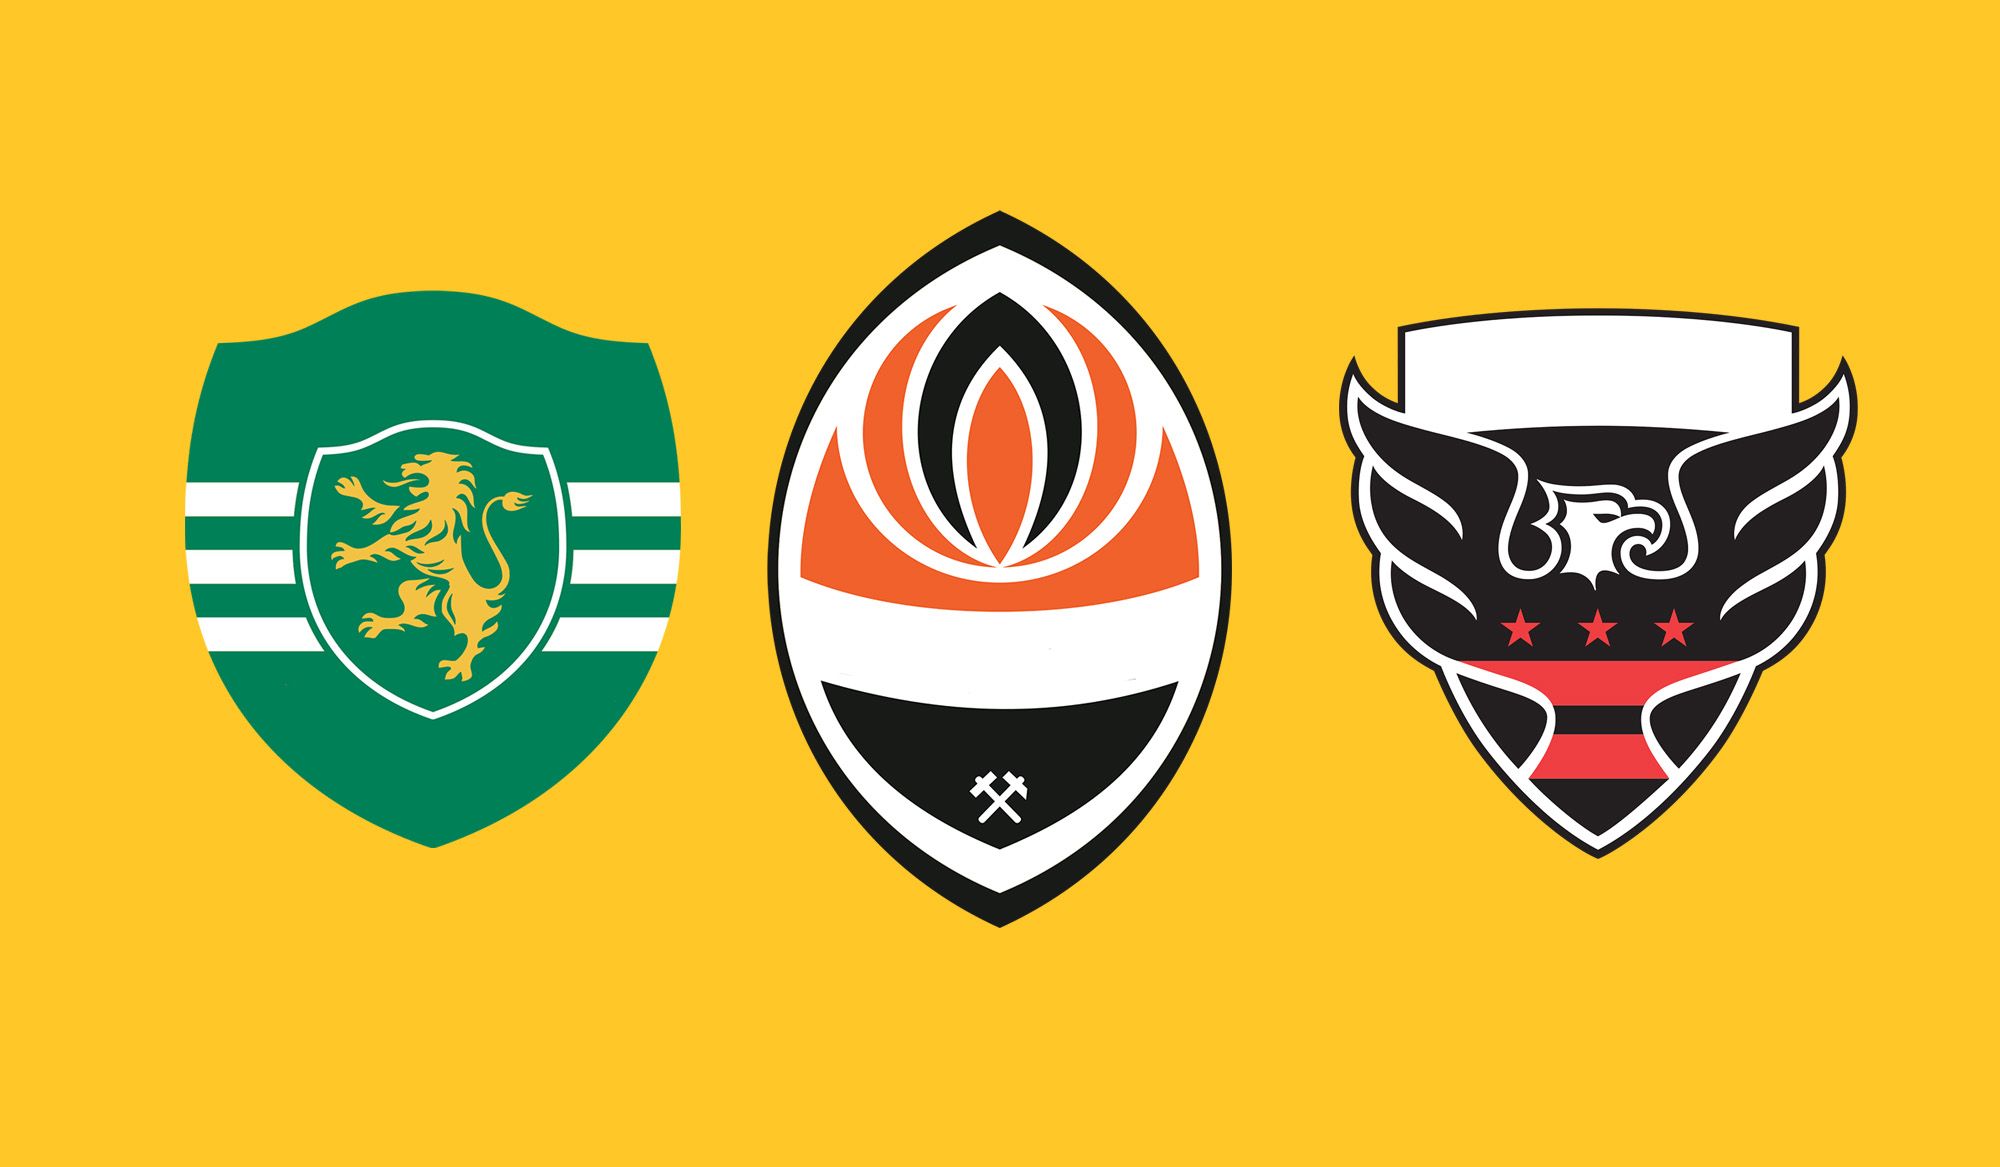 A Pic-Quiz of Soccer Teams: Guess Football Club Icons and Logos by